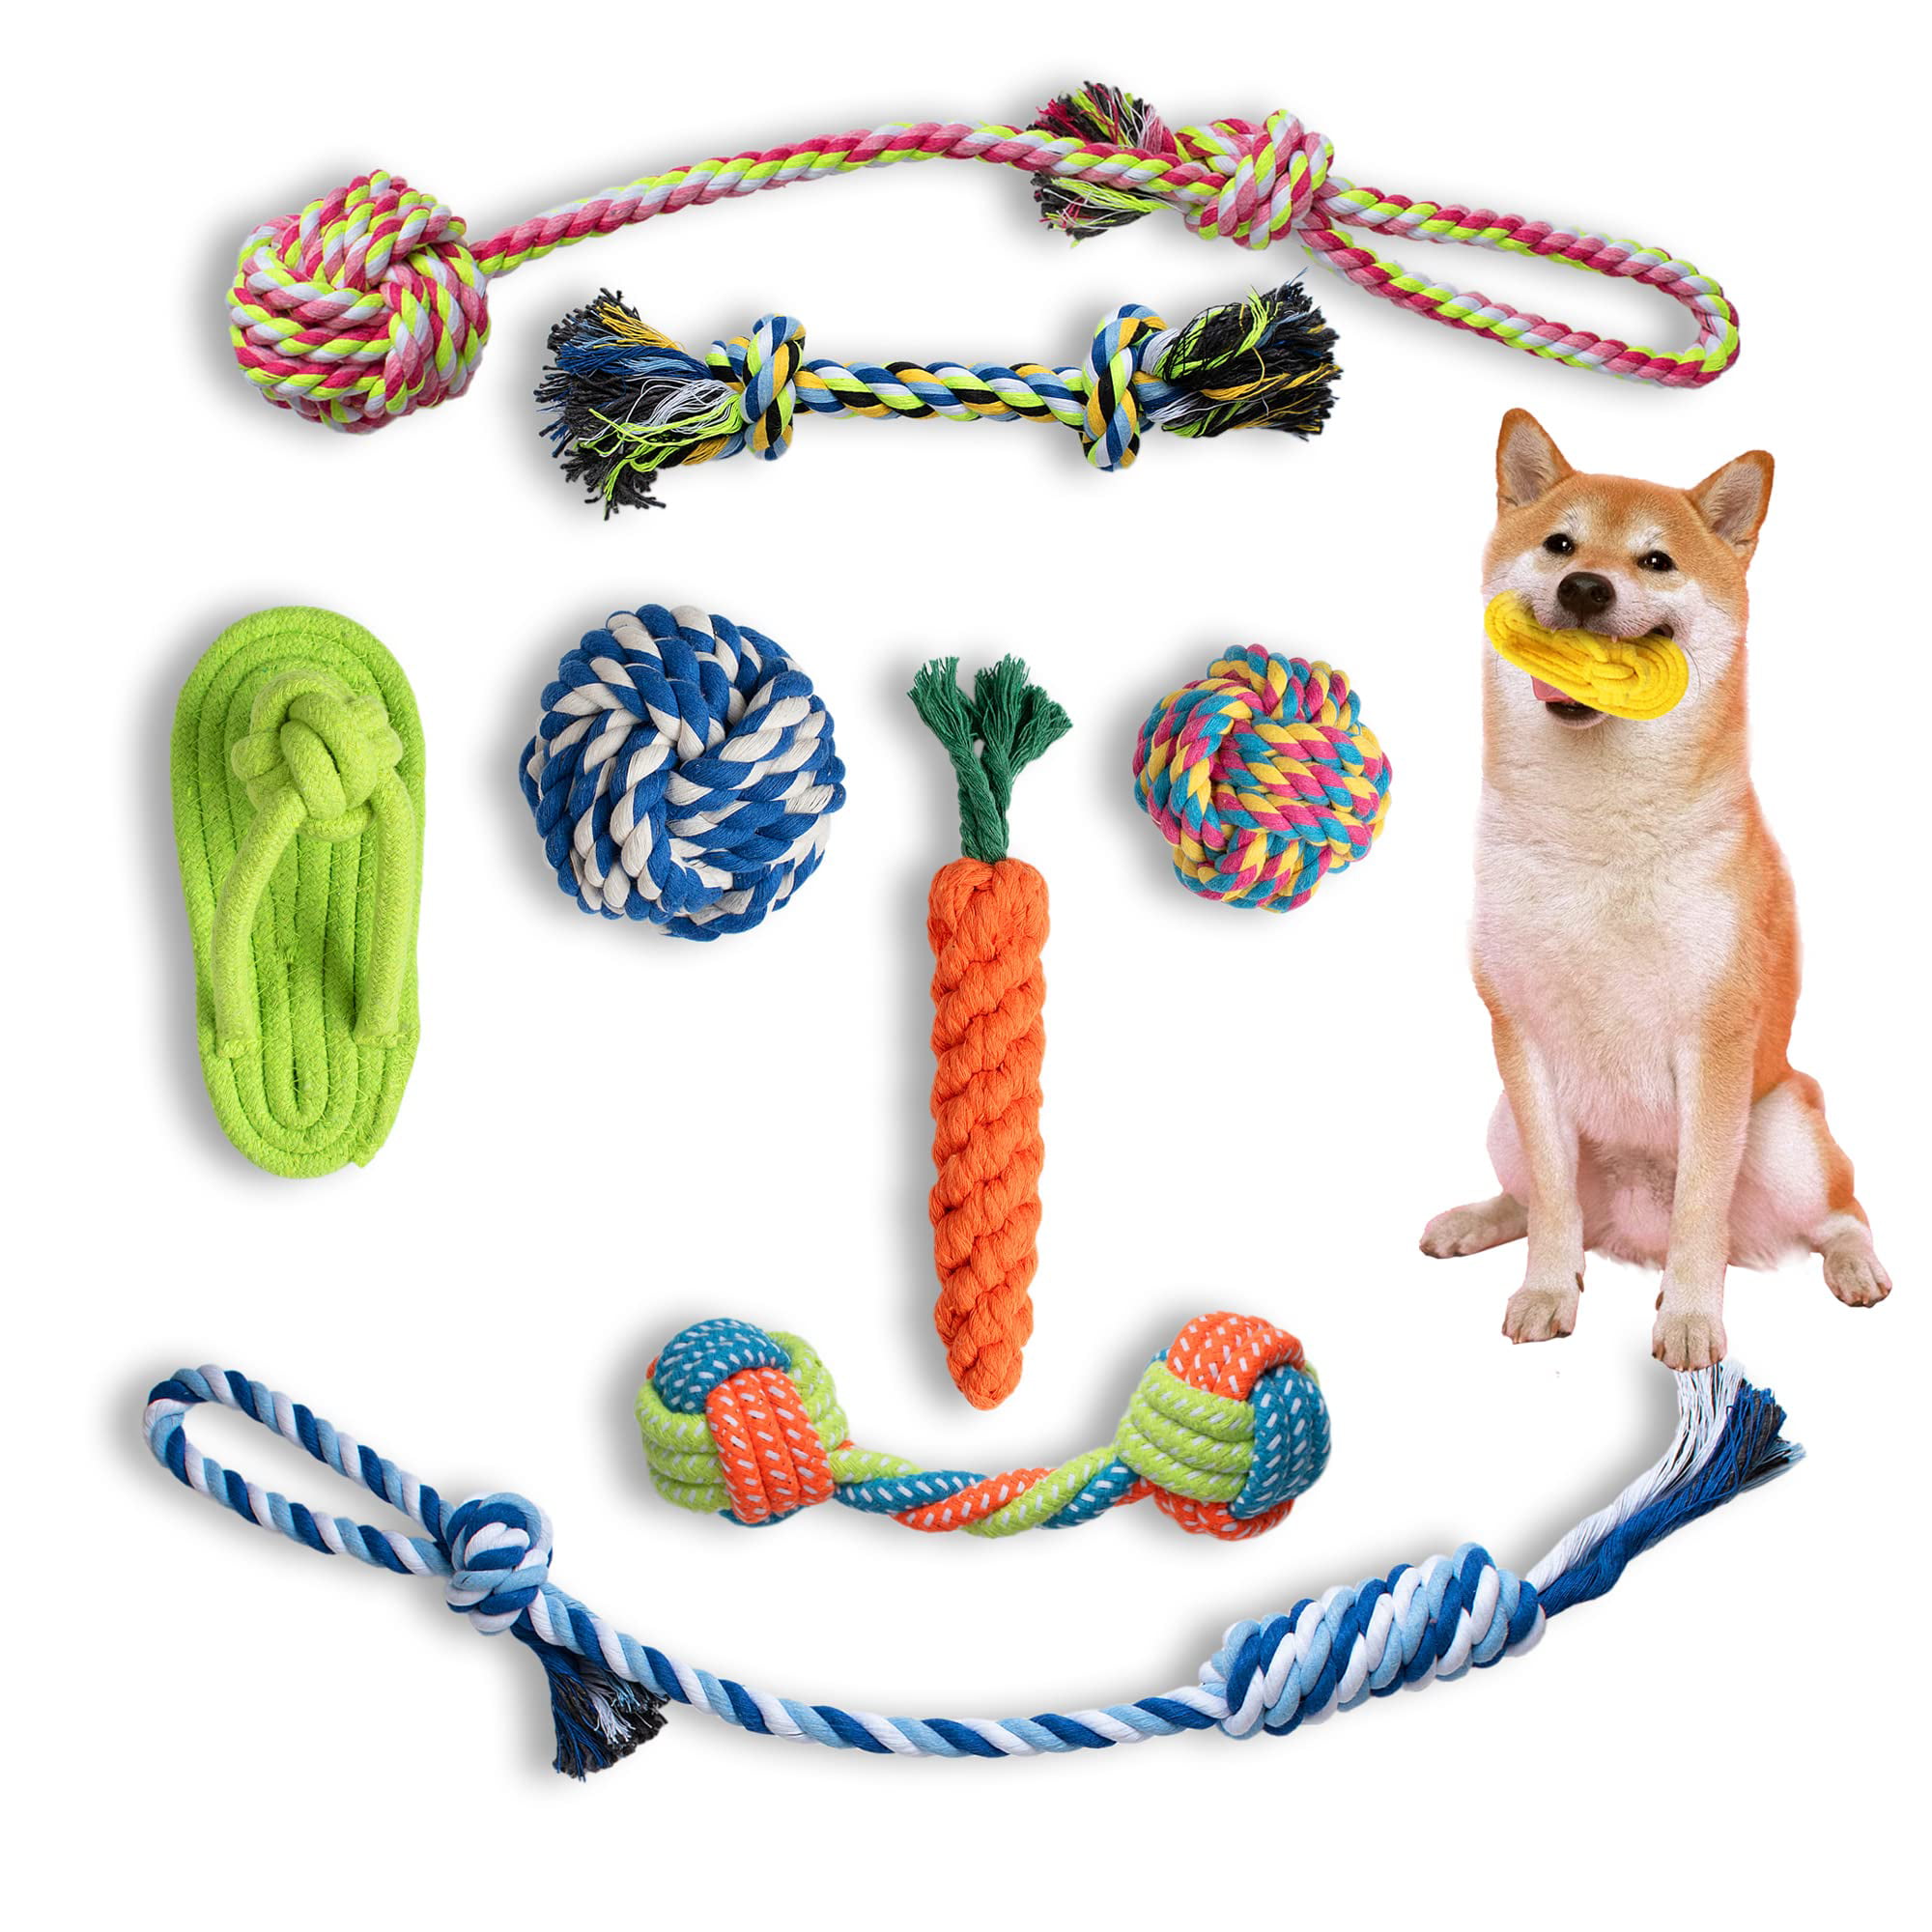 KriToy flirt pole for dogs, dog chew toys, durable dog rope toys, puppy toys  for teething